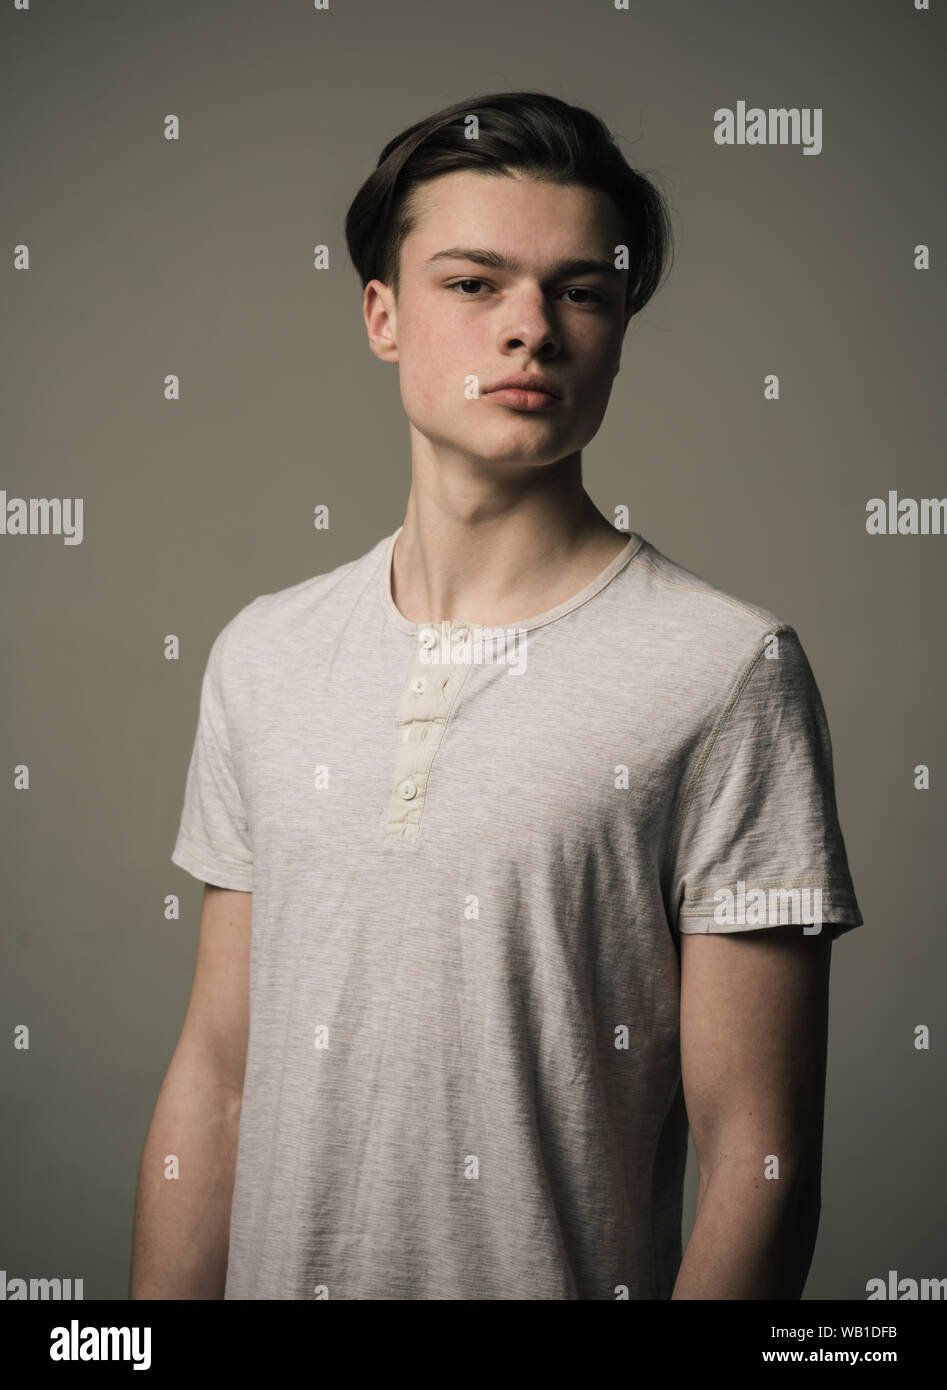 Teenage boy in white T-shirt isolated on gray background. Portrait of confident young man with long hair, eagerness of youth. Stock Photo